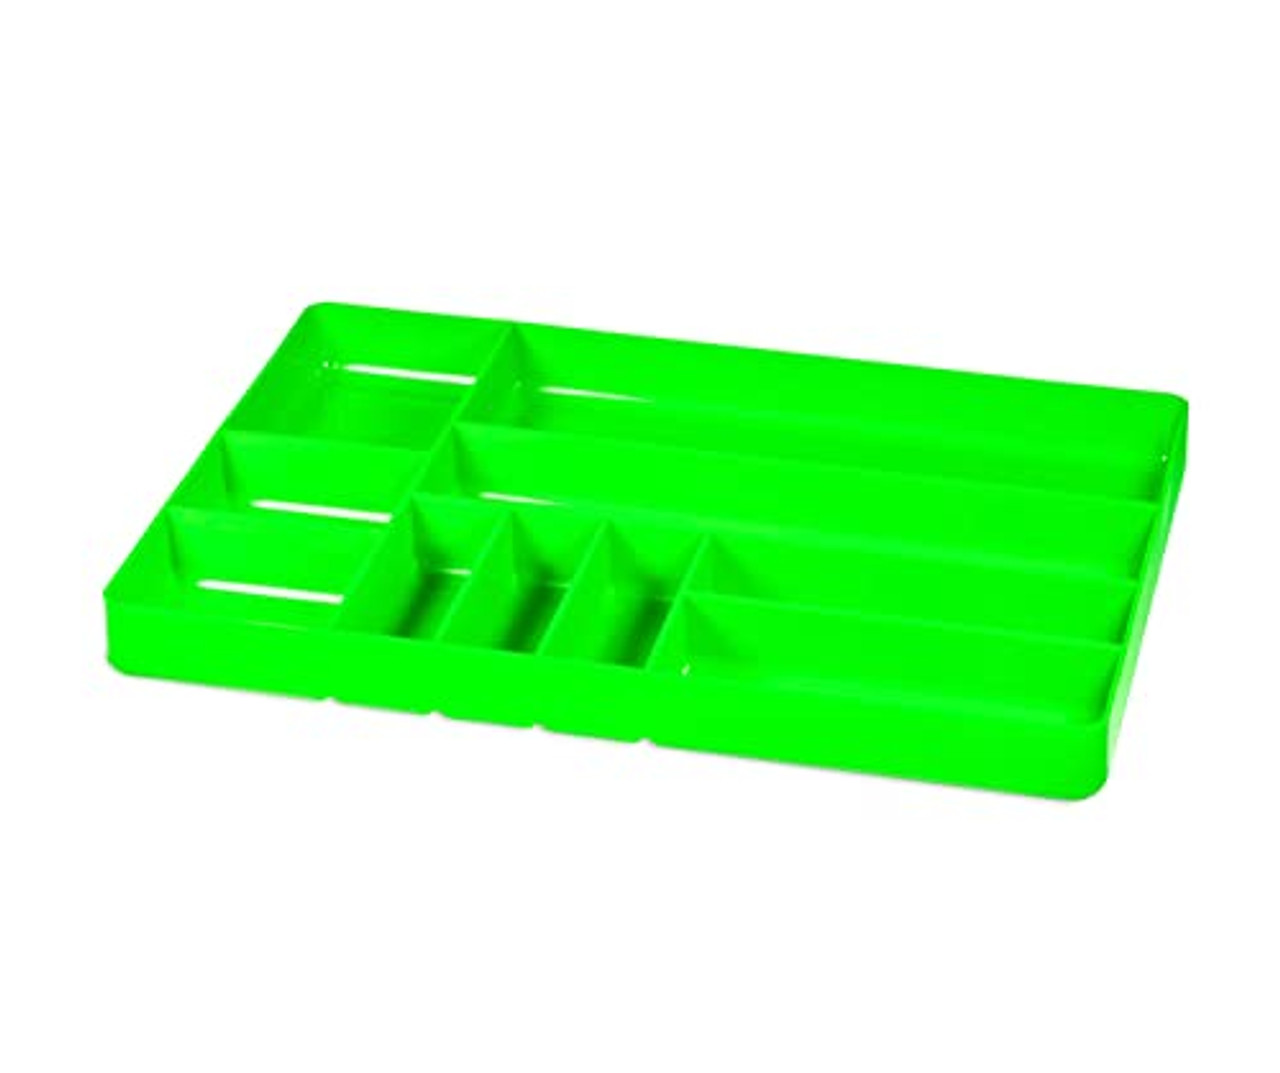 Ernst 5018 11 x 16 10 Compartment Tool Organizer Tray - Green